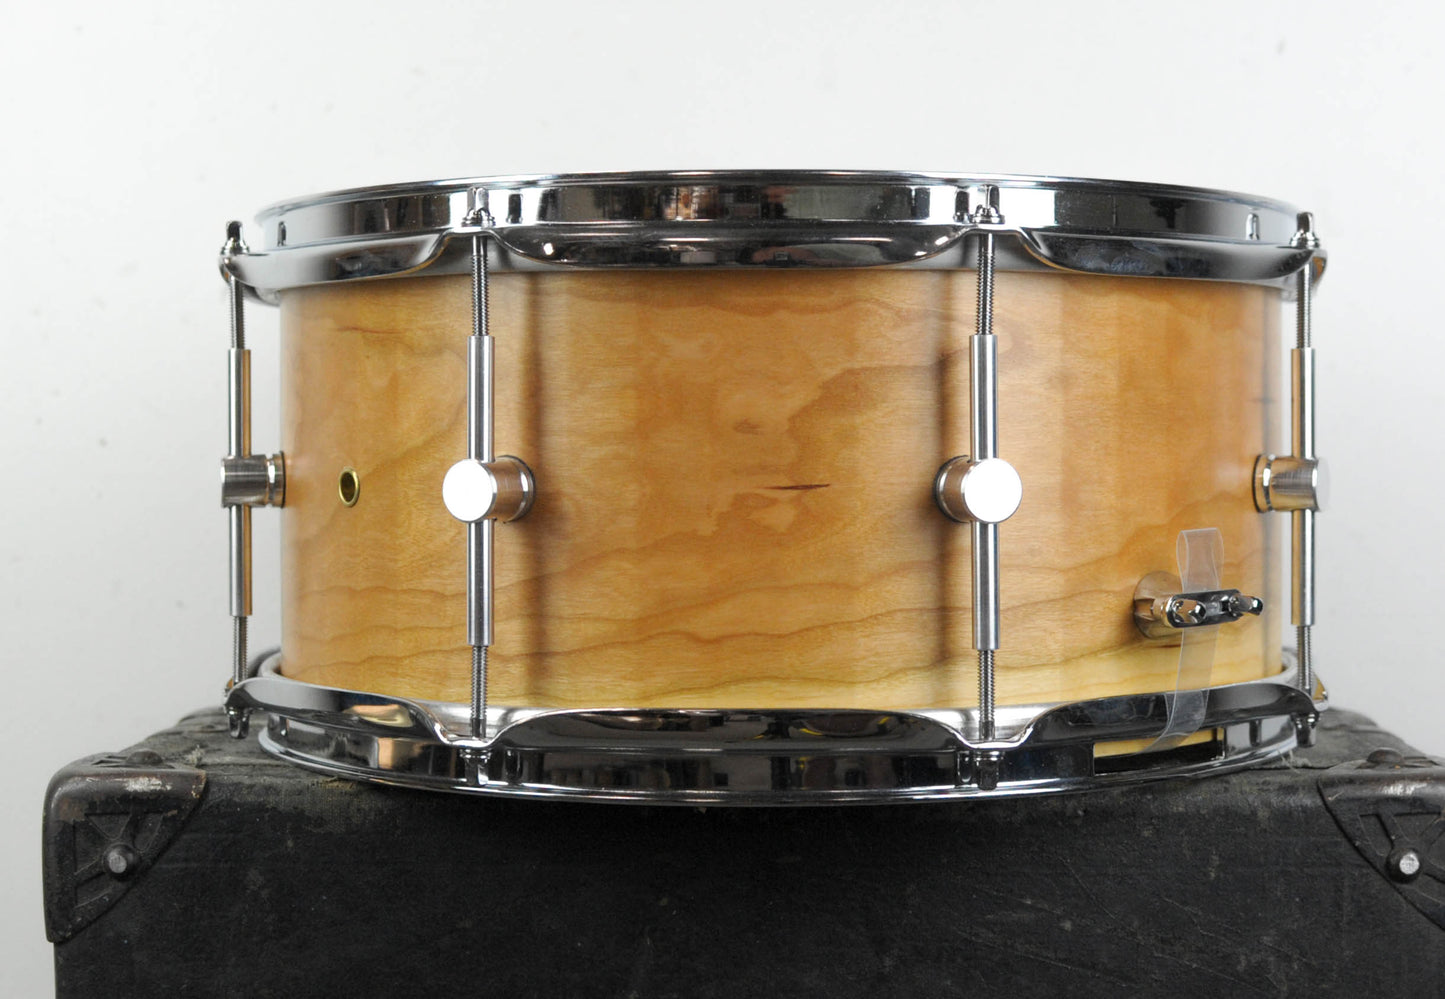 Kerf Drum Co. 6.5x14 Natural Cherry Snare Drum